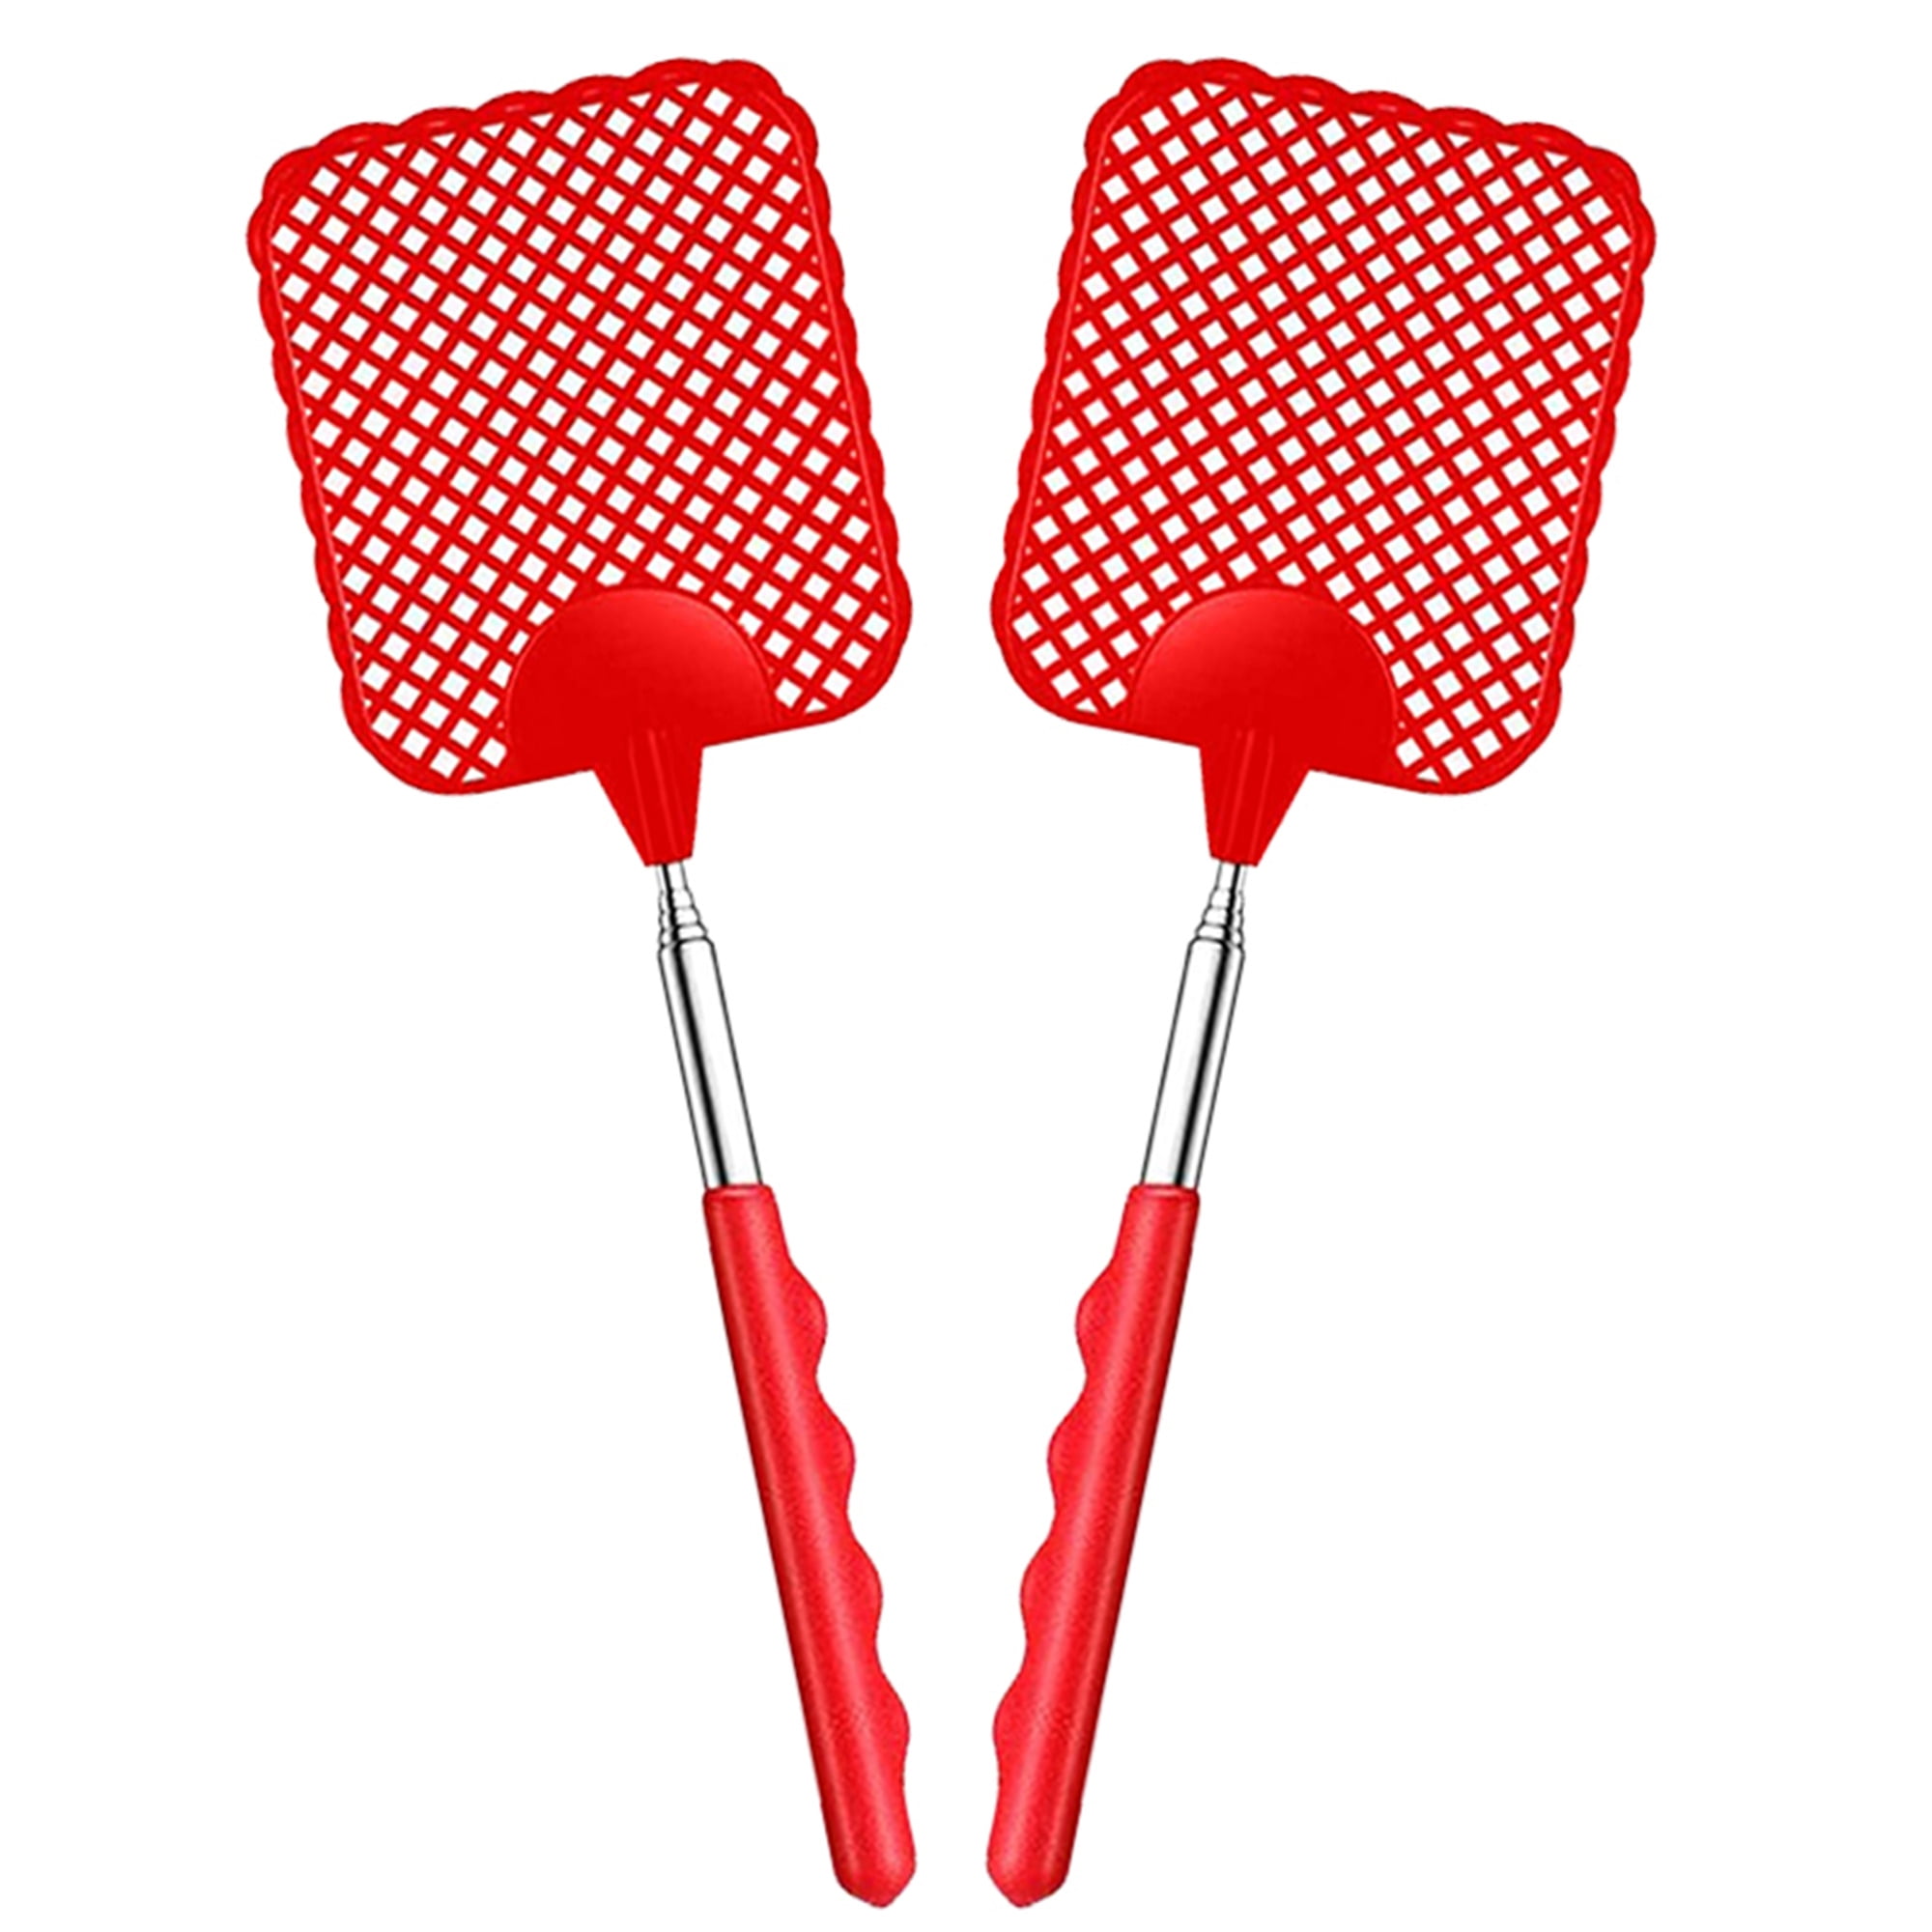 Elbourn 2-Pack Fly Swatters, Manual Swat Pest Control, Mosquito